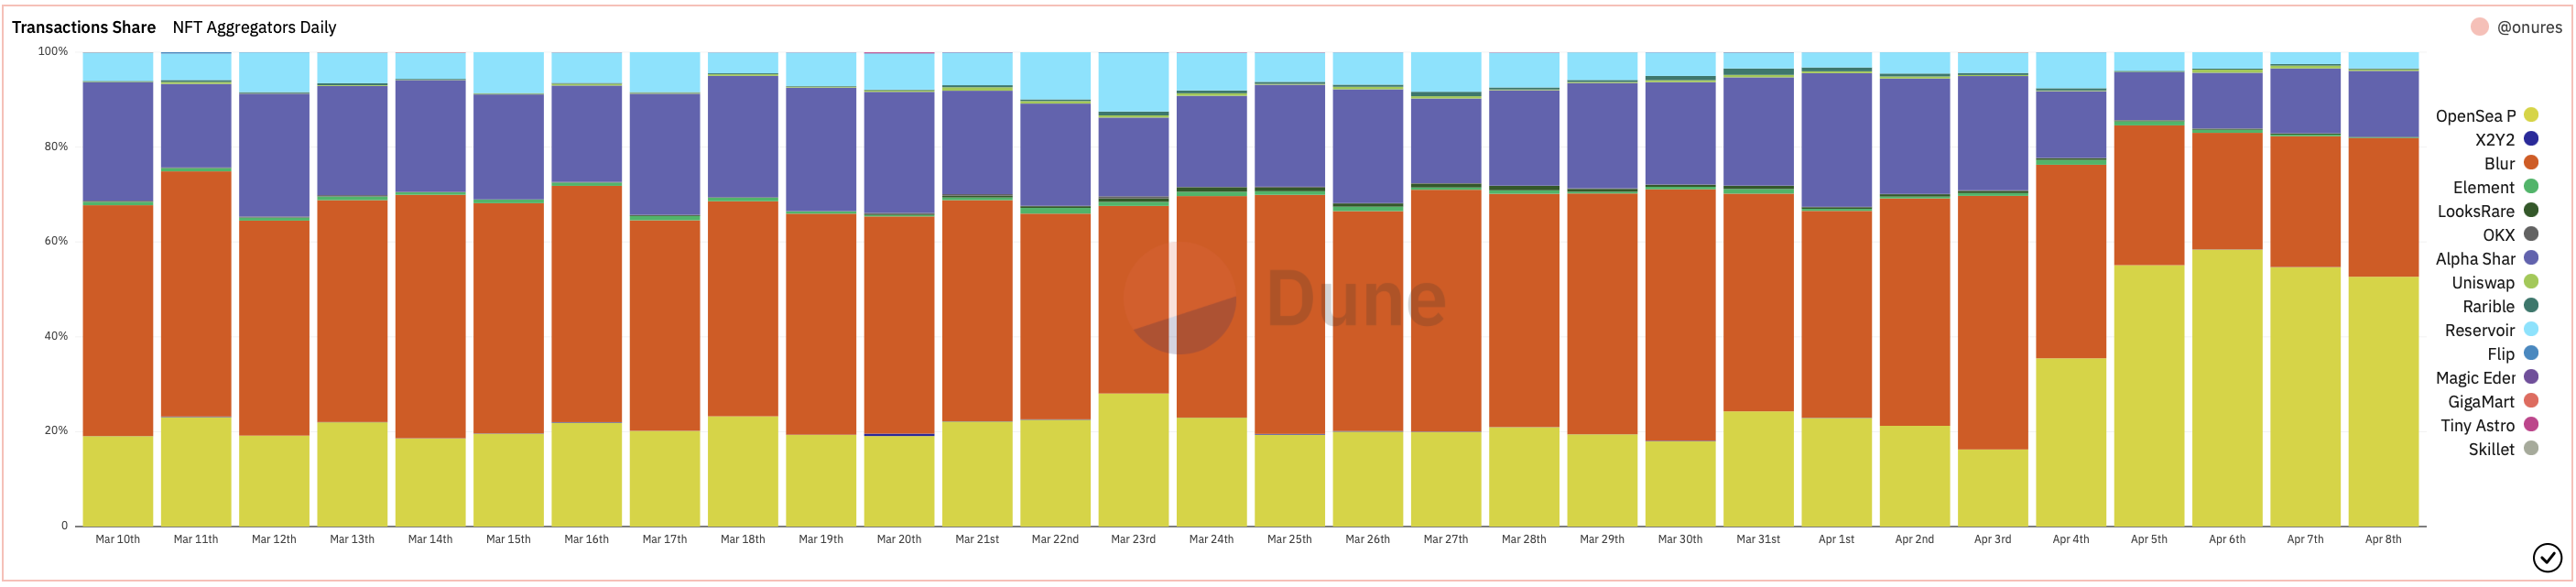 Dune chart showing transactions share among NFT aggregators on a daily time frame